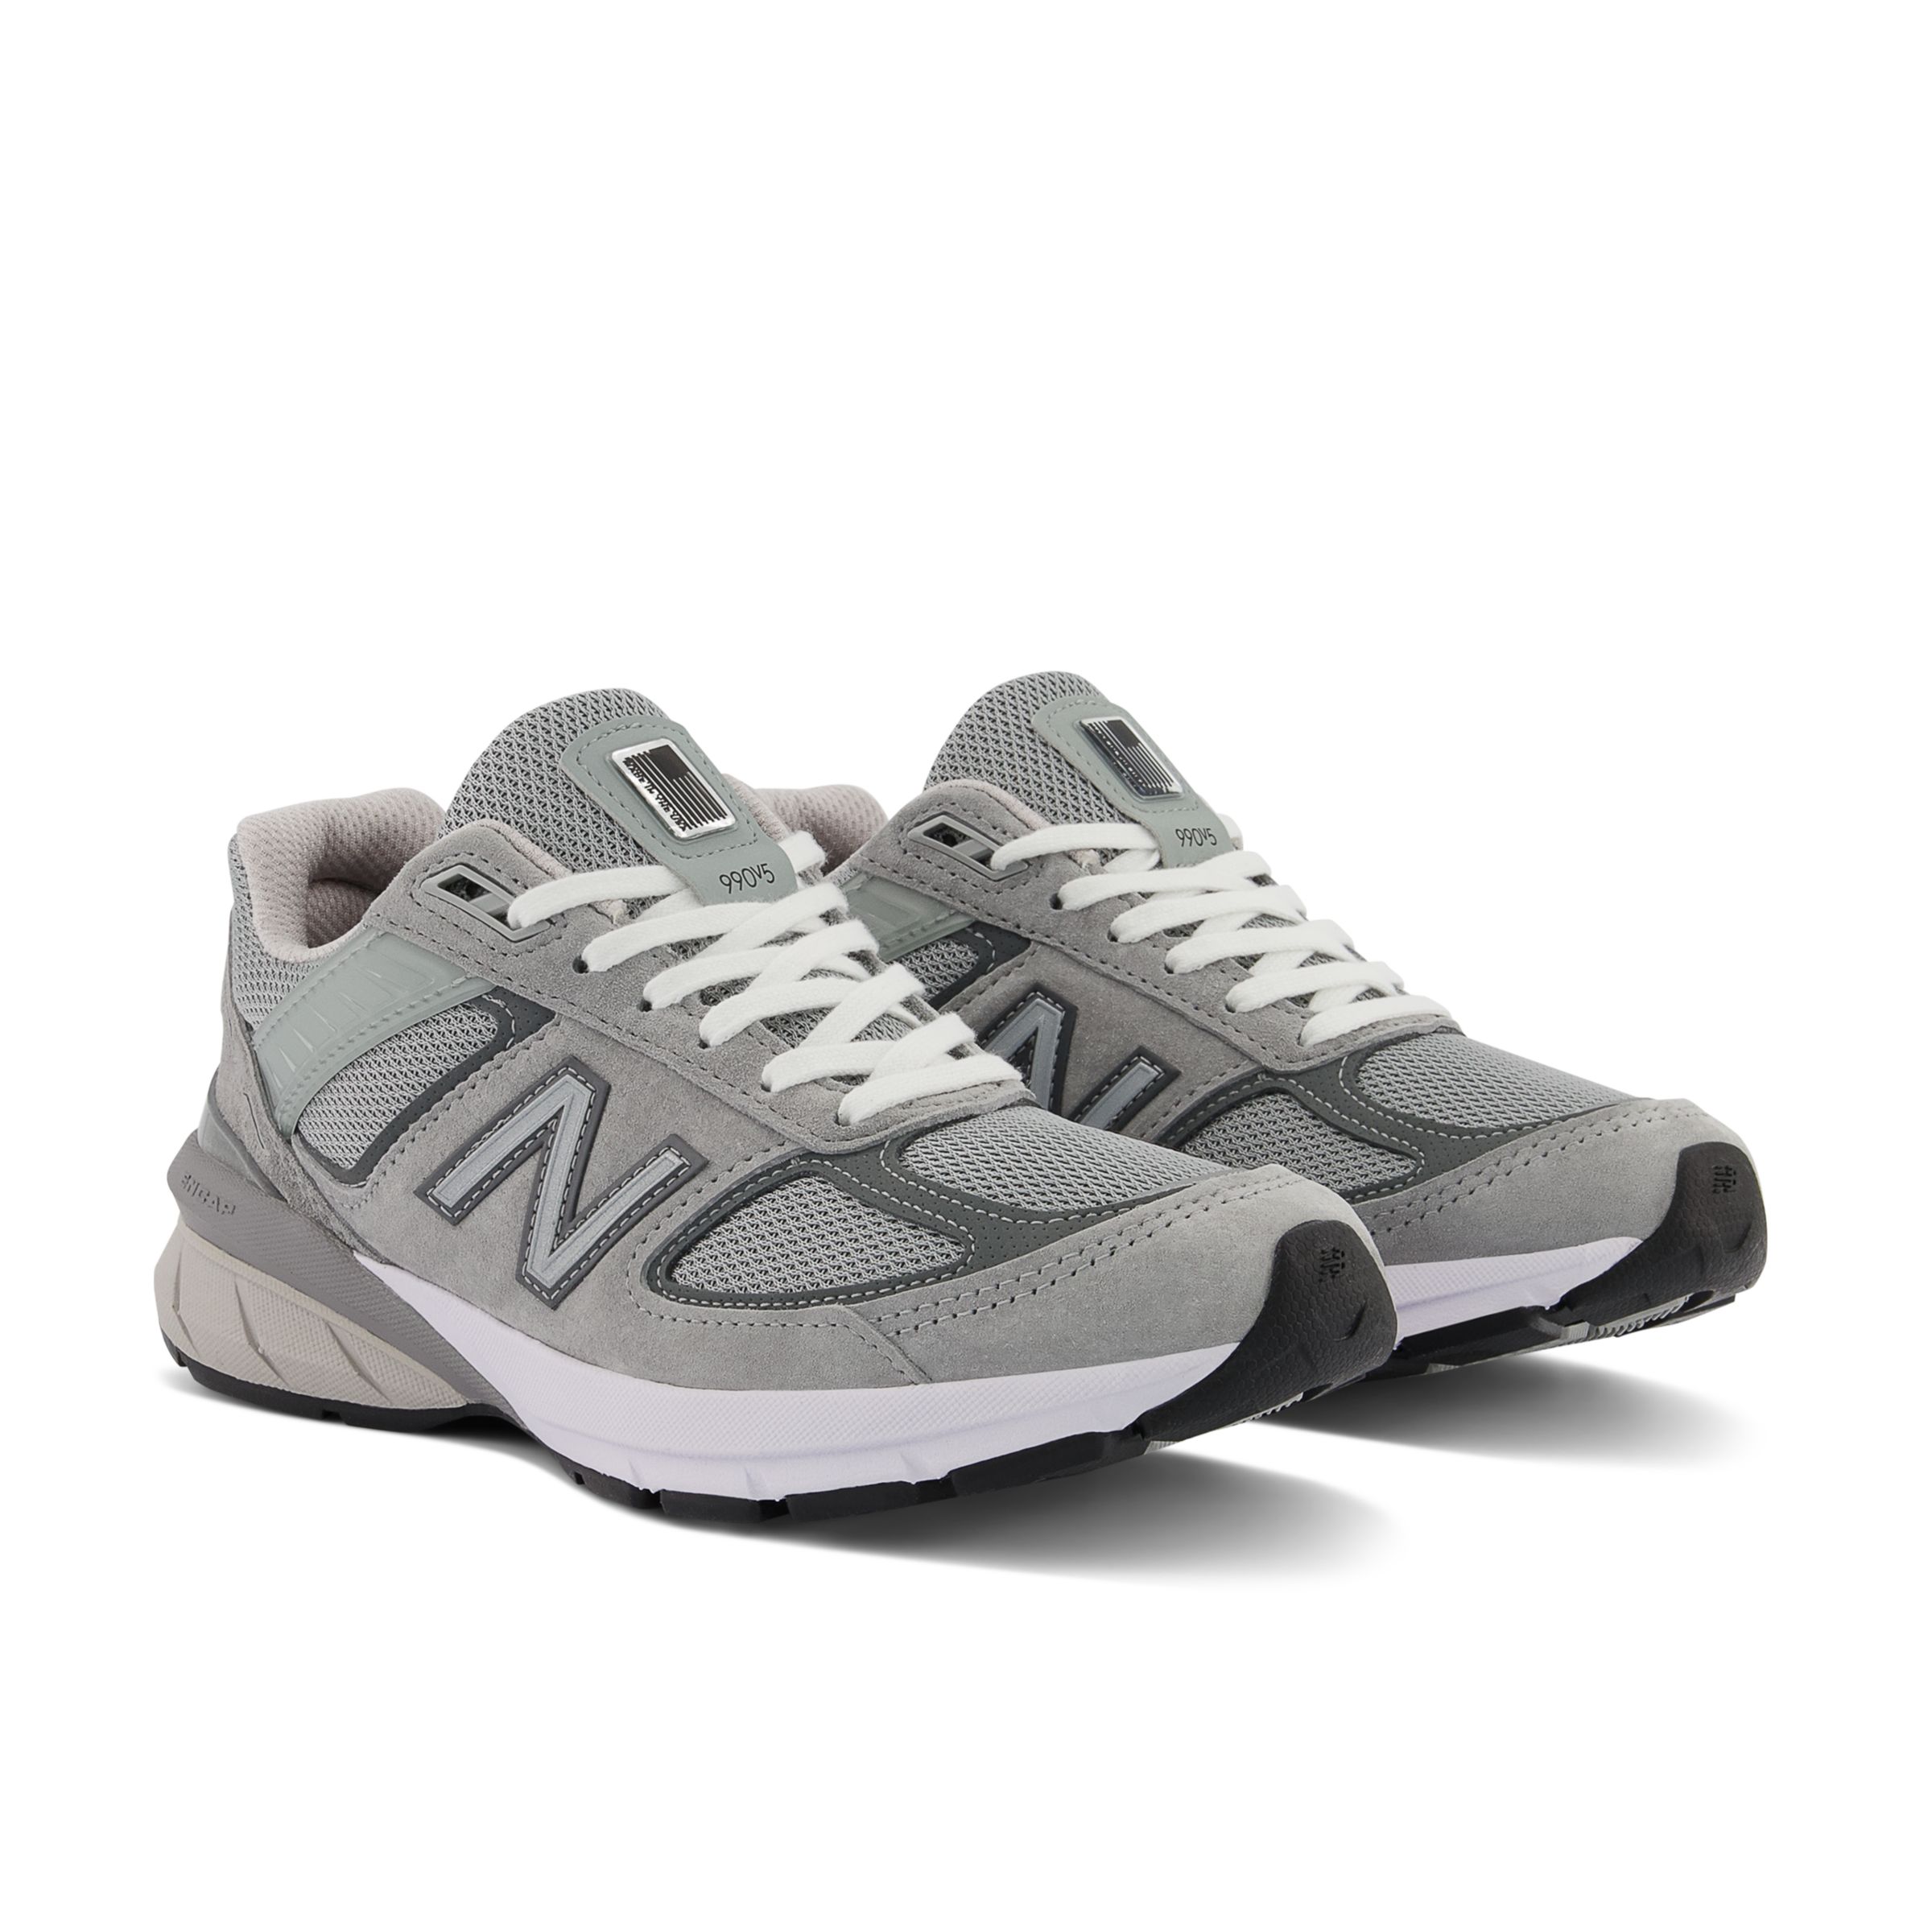 Women's 990v5 Made in US Shoes - New Balance